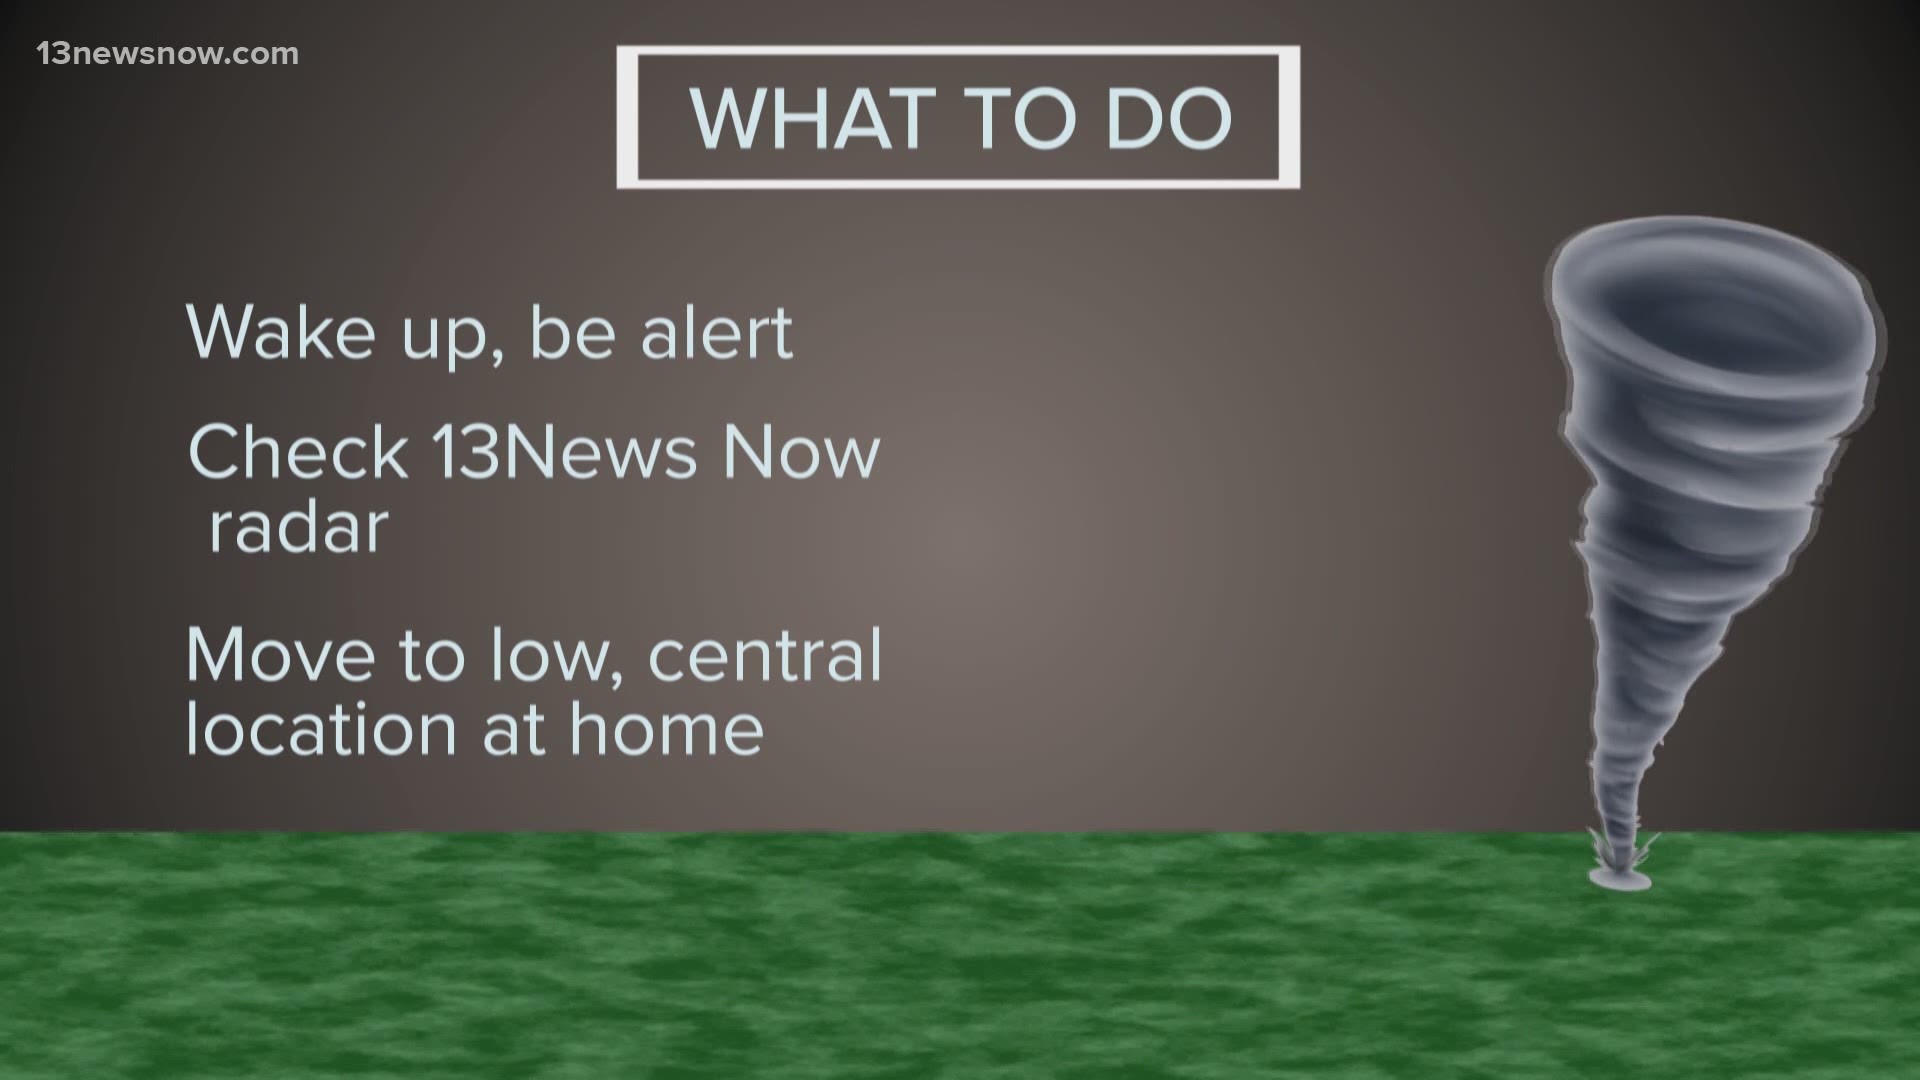 It's a sound you can't forget: an alarm, blaring on your cell phone, telling you there's a tornado warning and you need to seek shelter immediately.